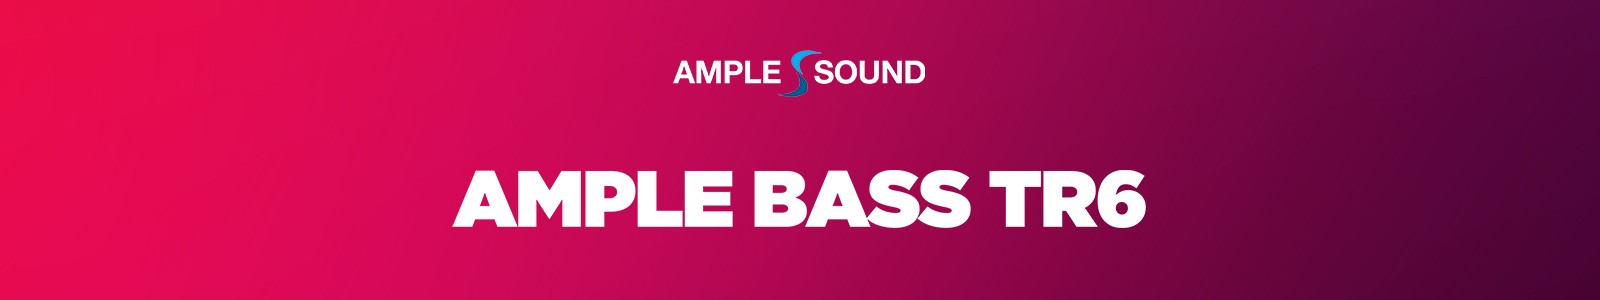 AmpleSound Ample Bass TR6